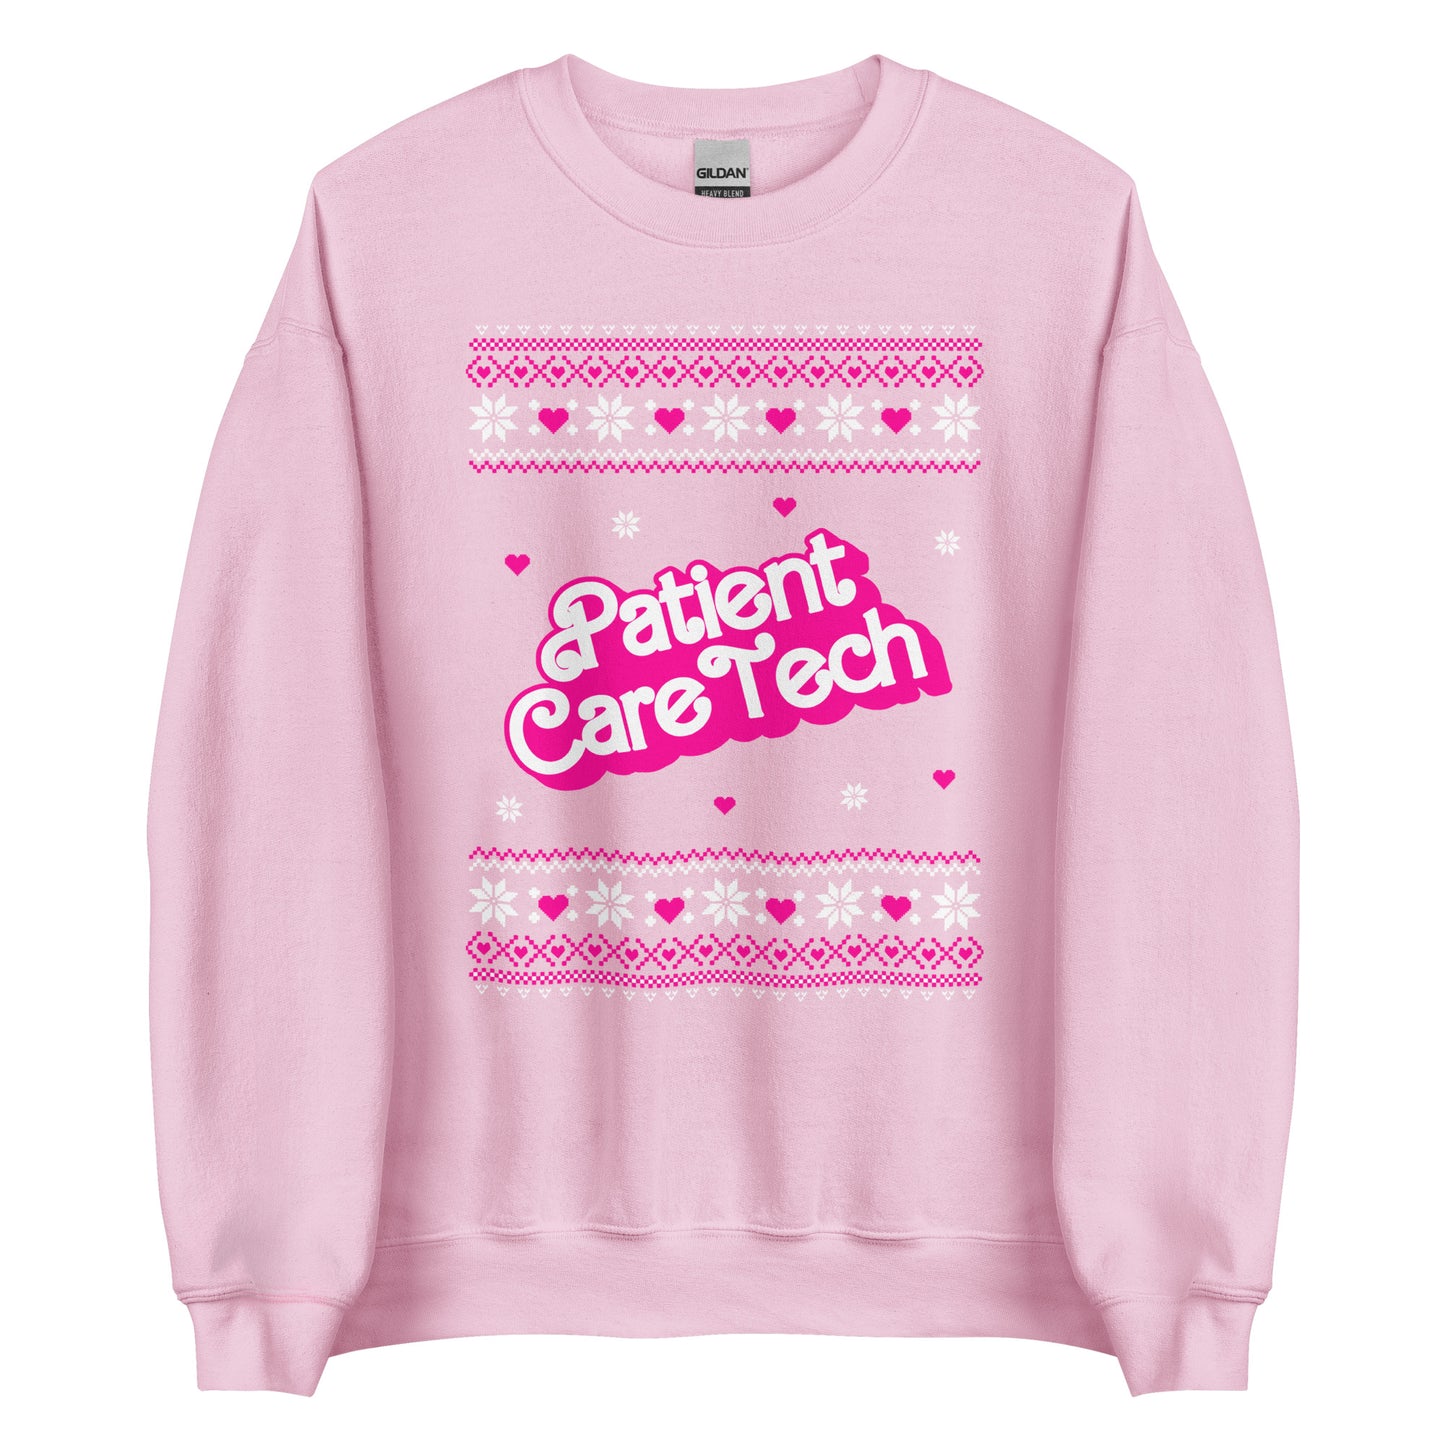 Barbie Patient Care Tech Ugly Christmas Sweater